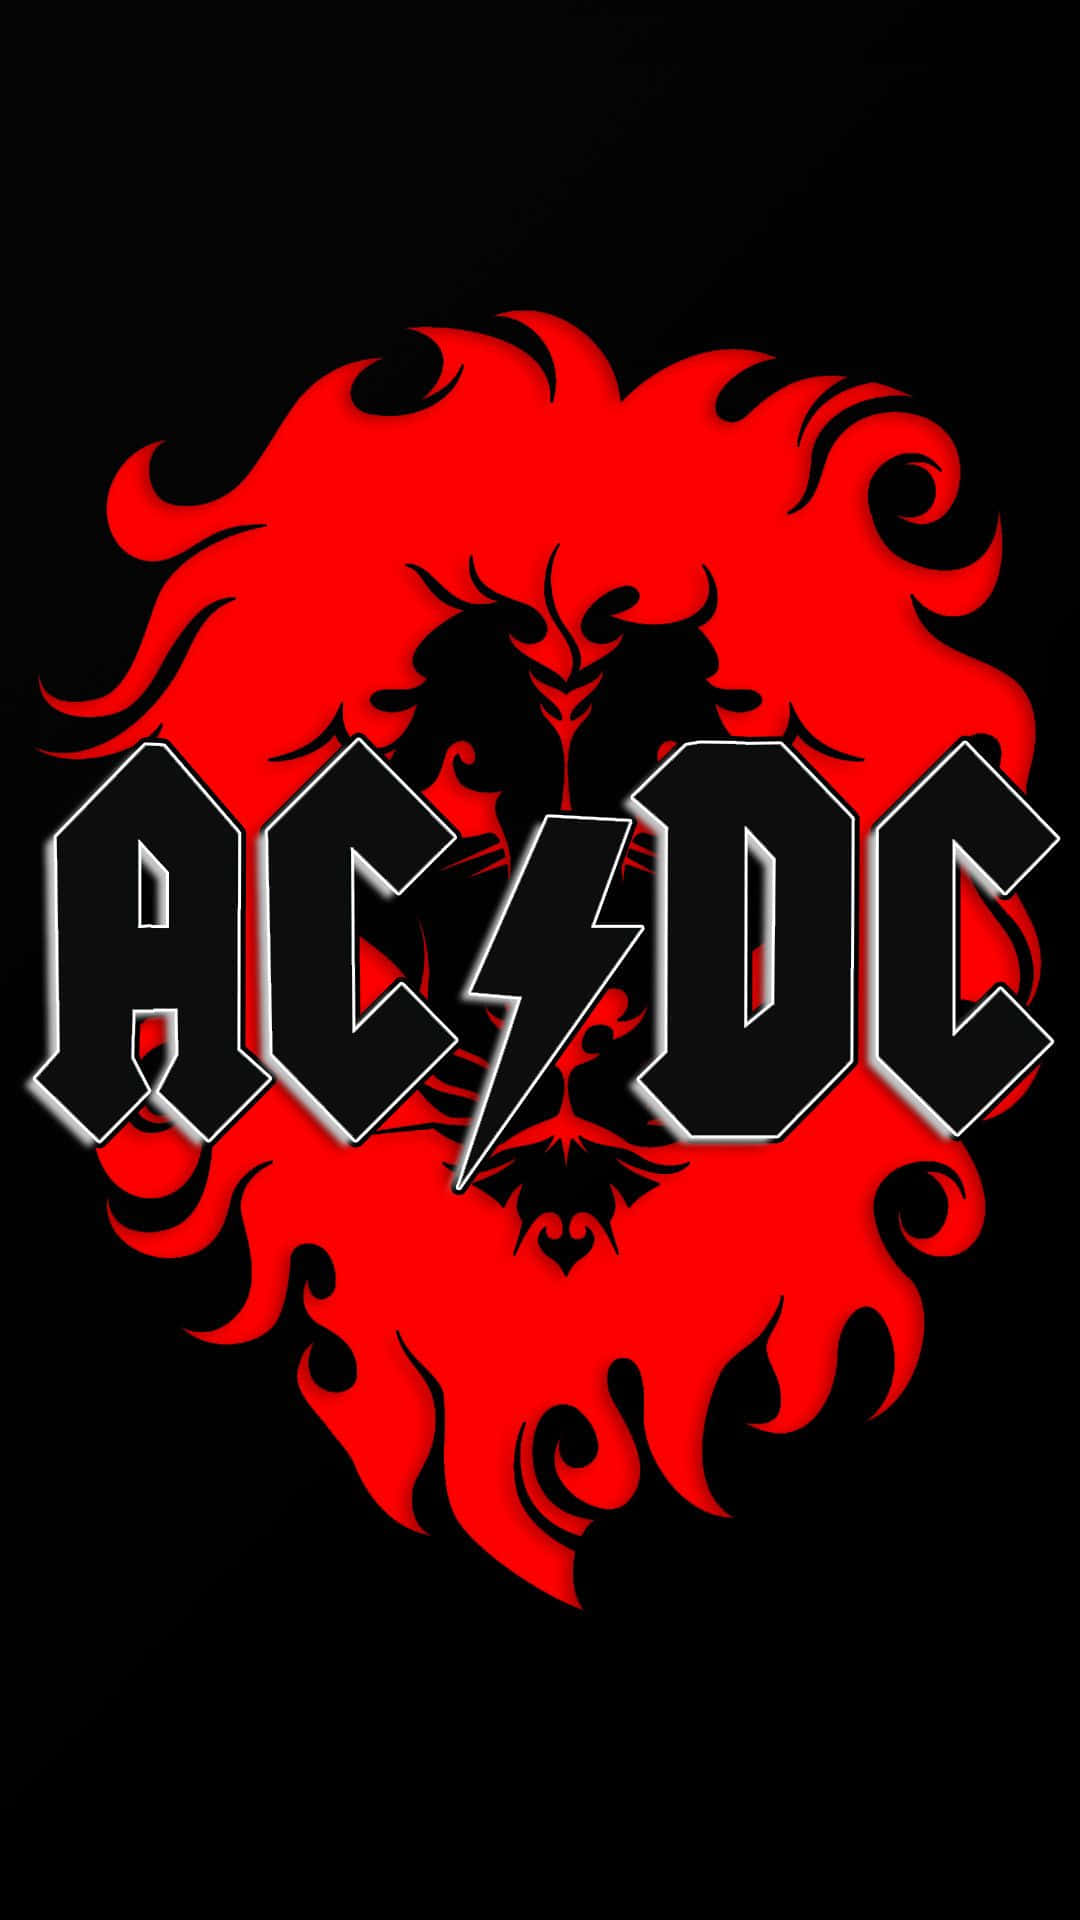 Rock on! The legend that is AC/DC. Wallpaper